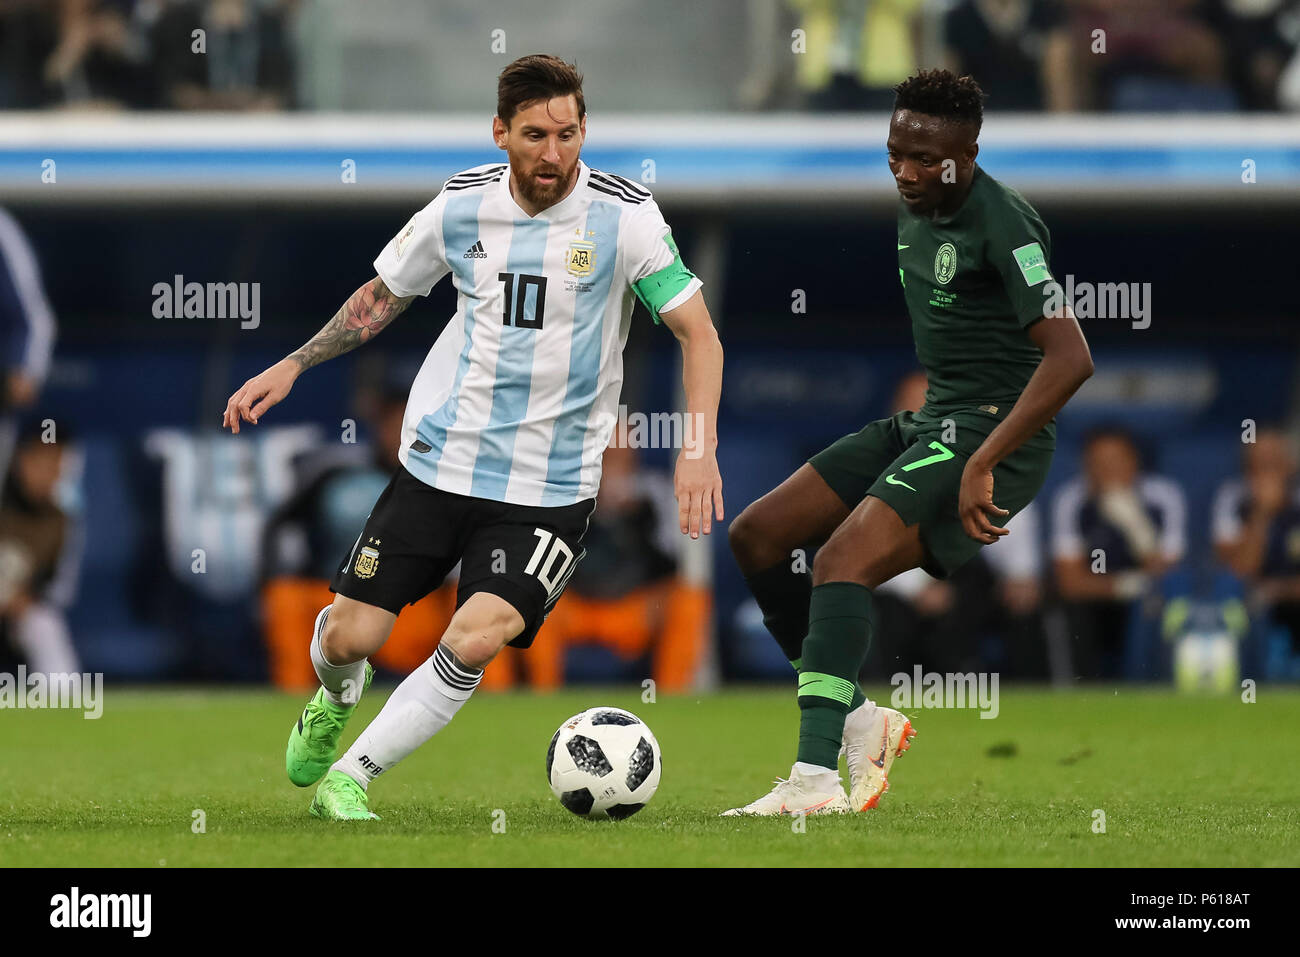 St Petersburg, Russia. 26th Jun, 2018. Lionel Messi of Argentina and Ahmed Musa of Nigeria during the 2018 FIFA World Cup Group D match between Nigeria and Argentina at Saint Petersburg Stadium on June 26th 2018 in Saint Petersburg, Russia. (Photo by Daniel Chesterton/phcimages.com) Credit: PHC Images/Alamy Live News Stock Photo